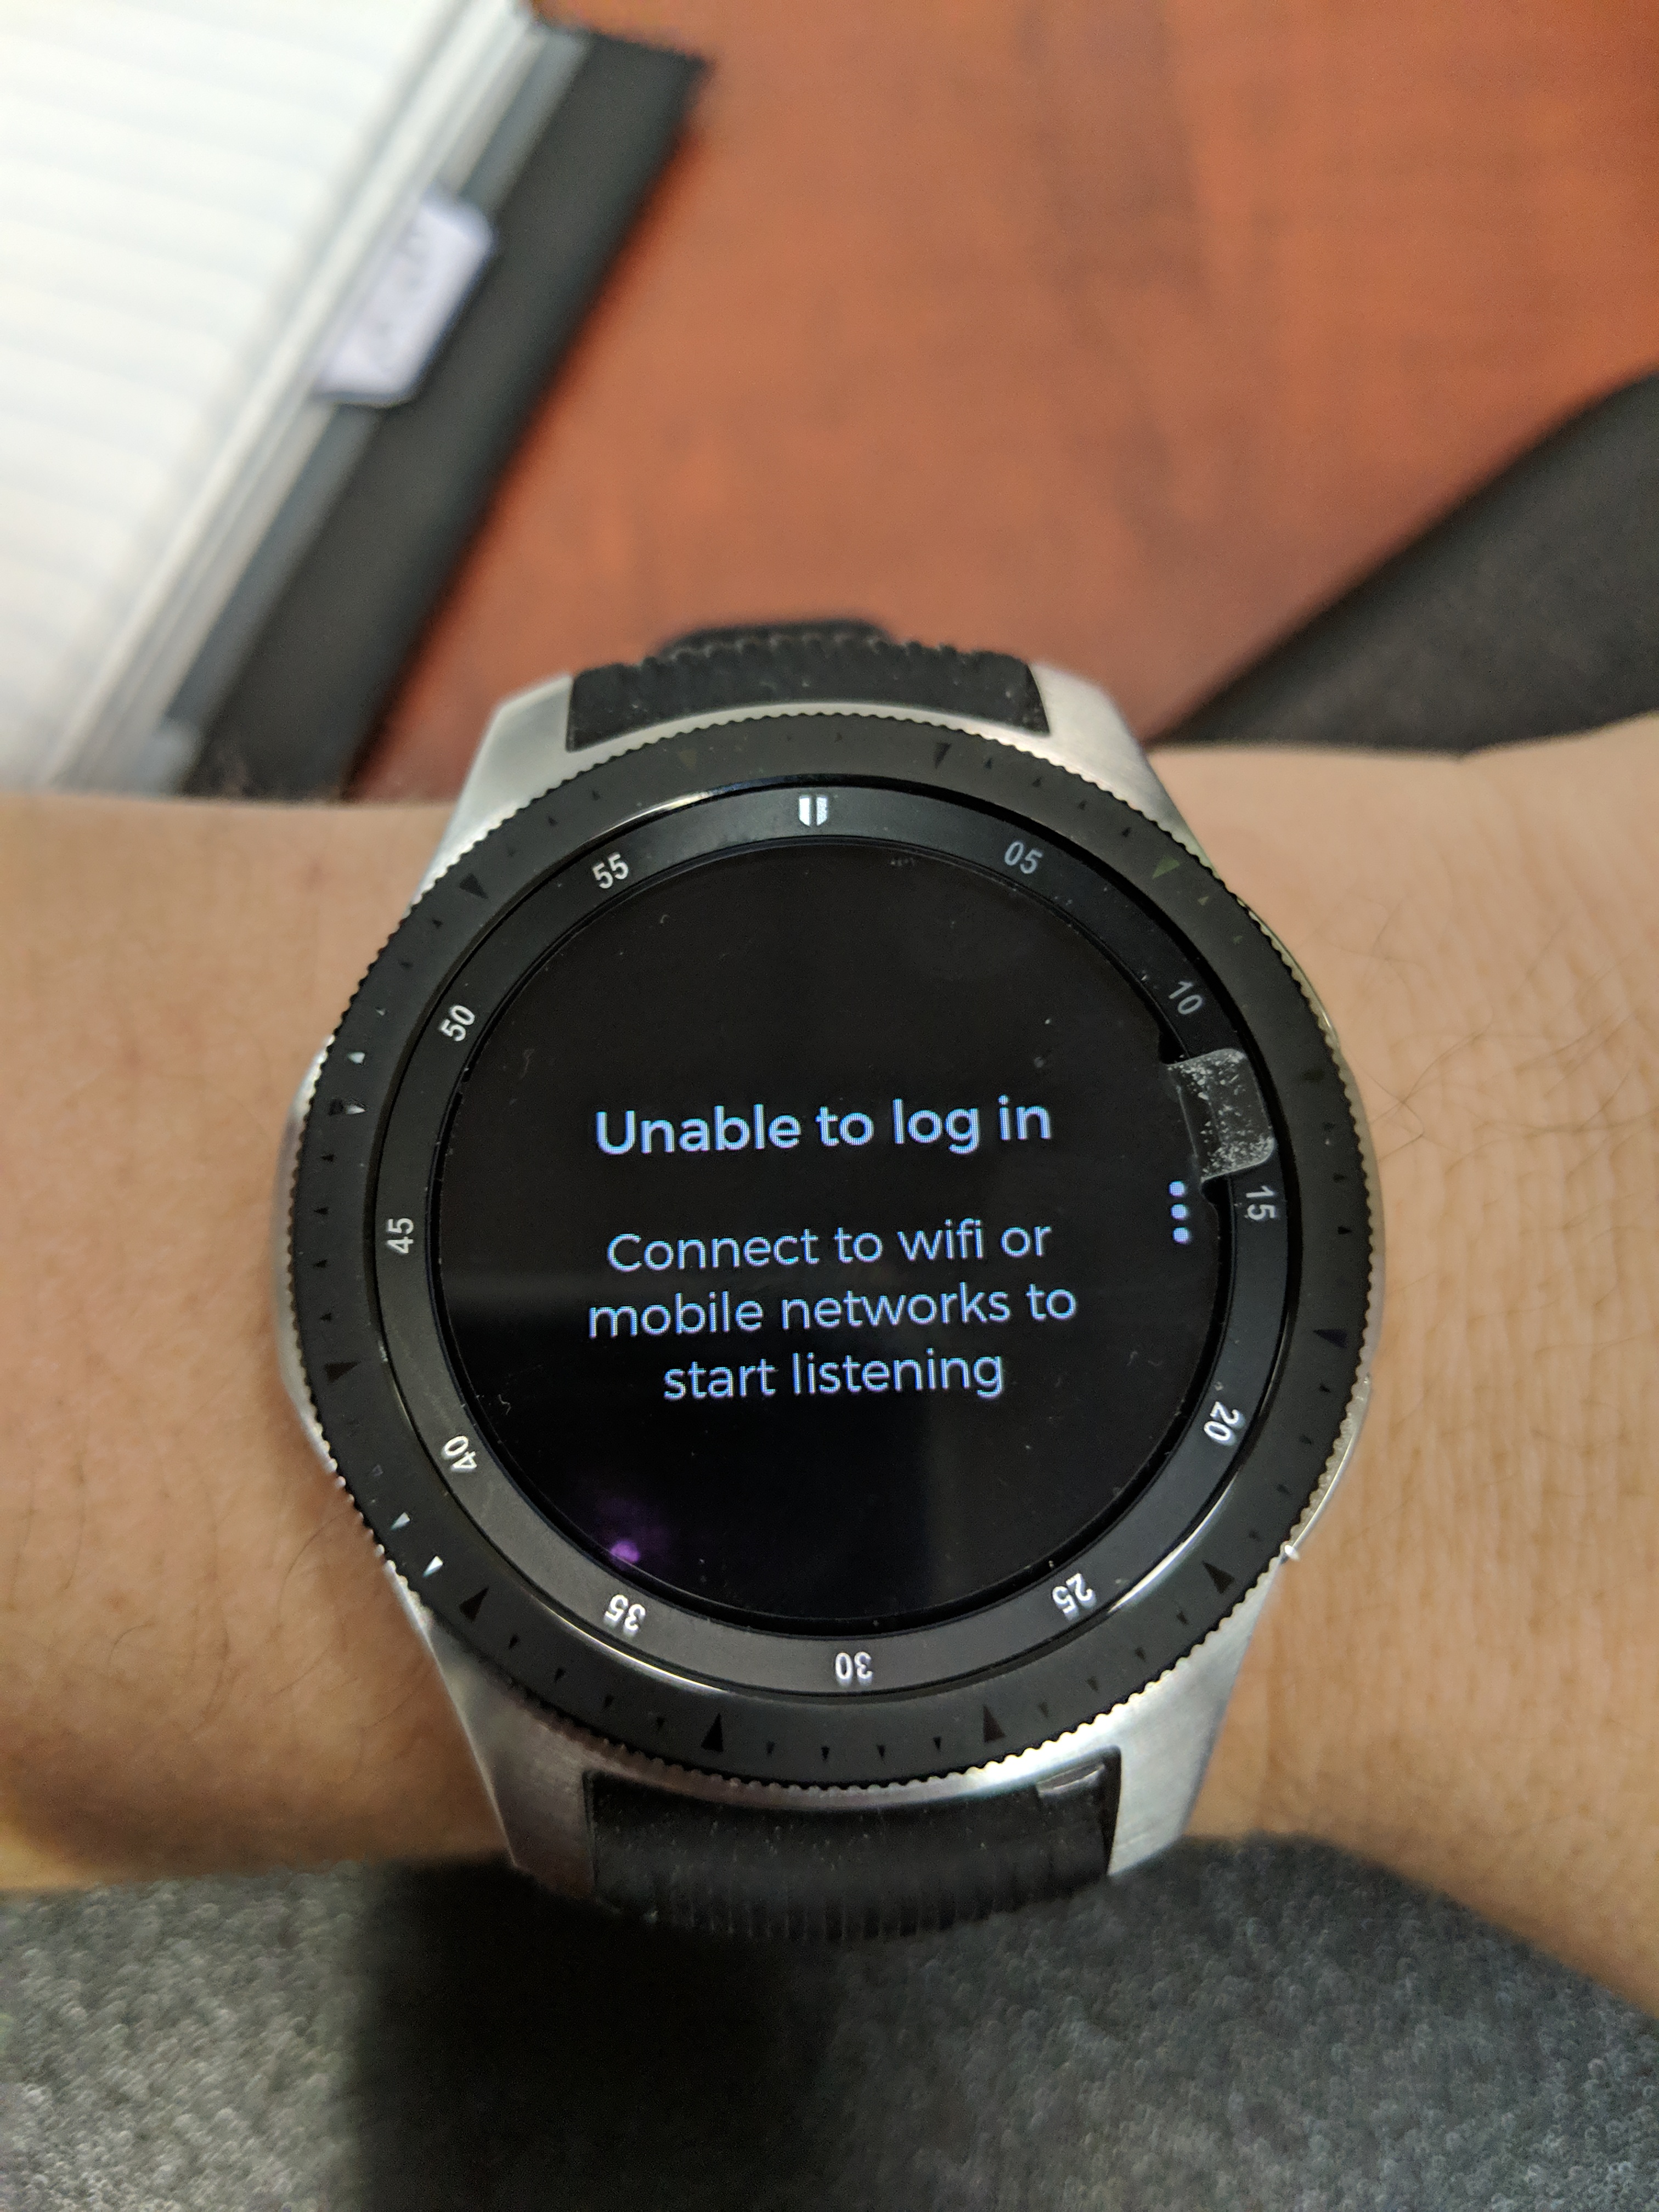 Unable to log into spotify app gear s3 user